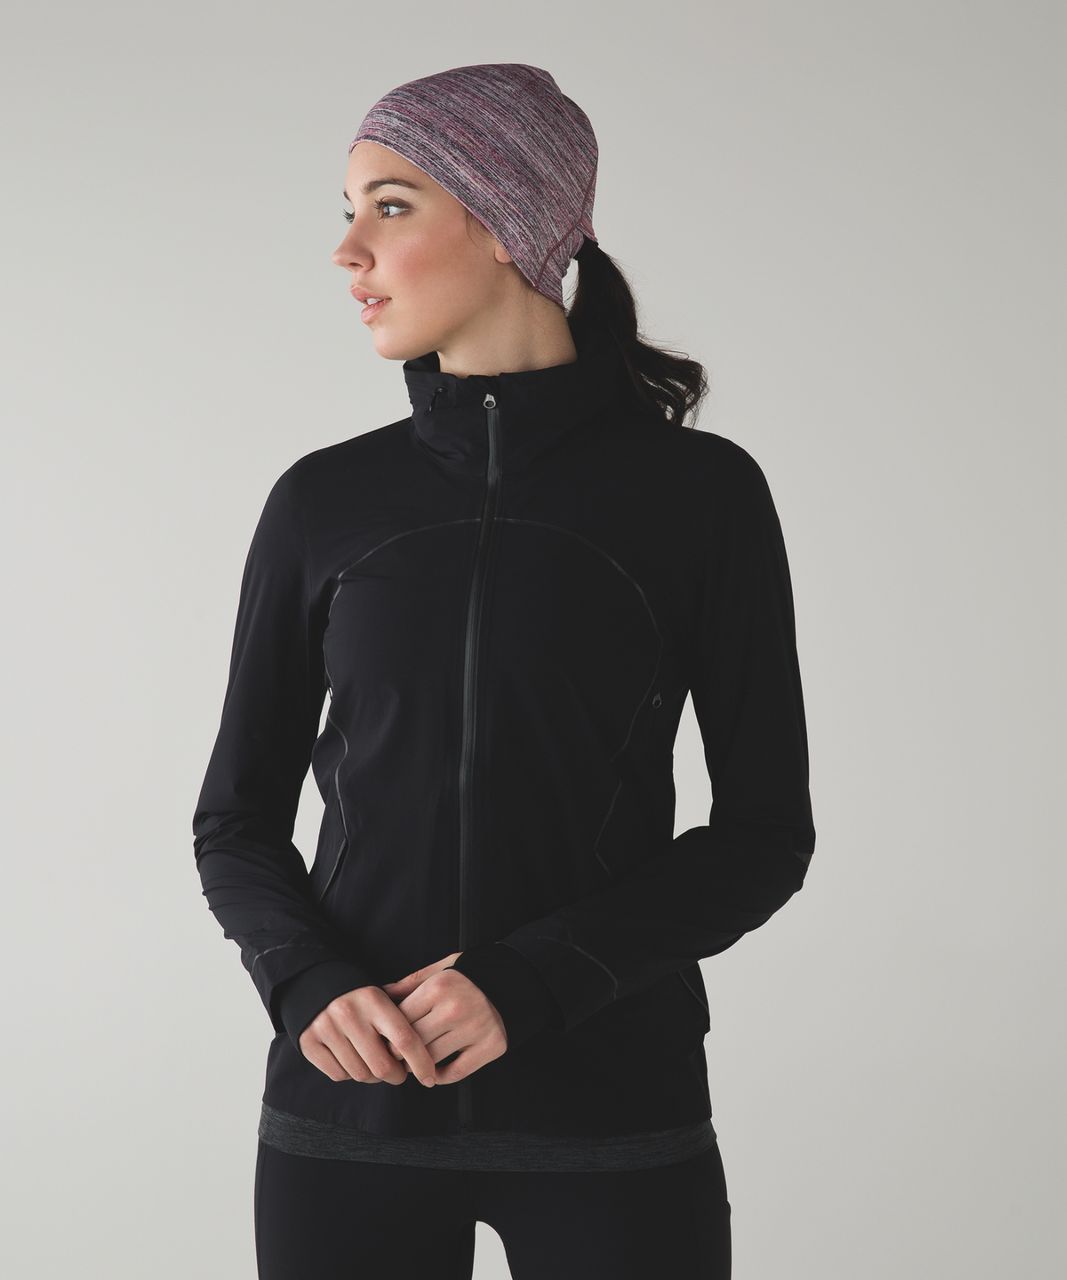 Lululemon Run And Done Toque - Space Dye Camo Berry Rumble Multi